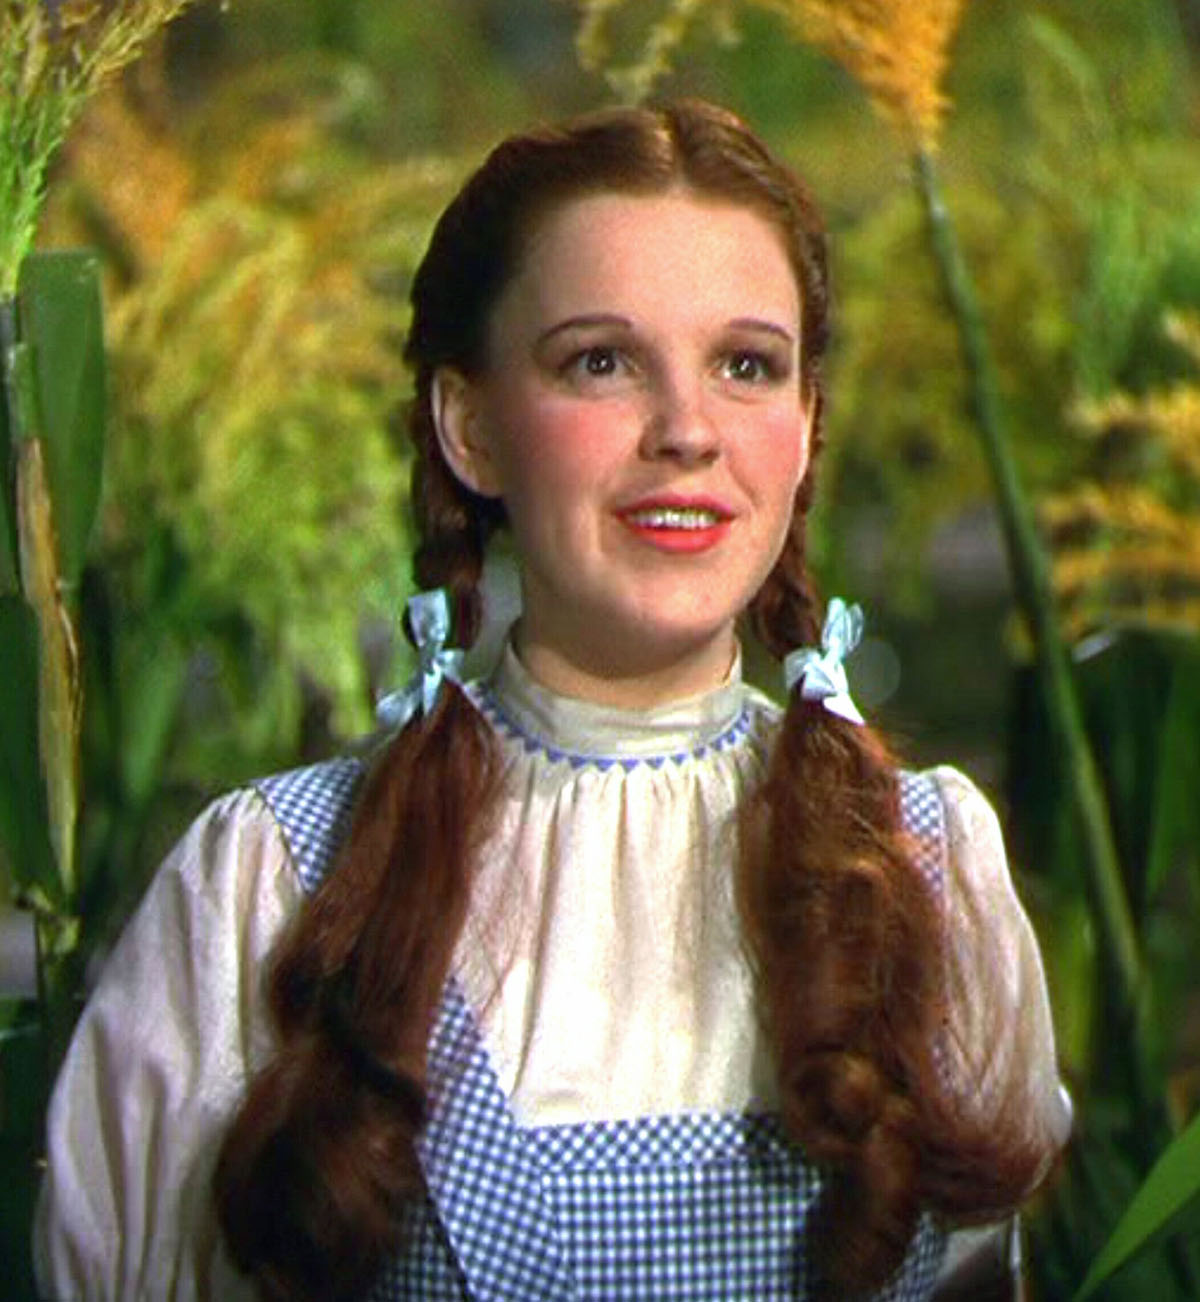 The Wizard of Oz is getting remade by the director of Watchmen, Nicole Kass...